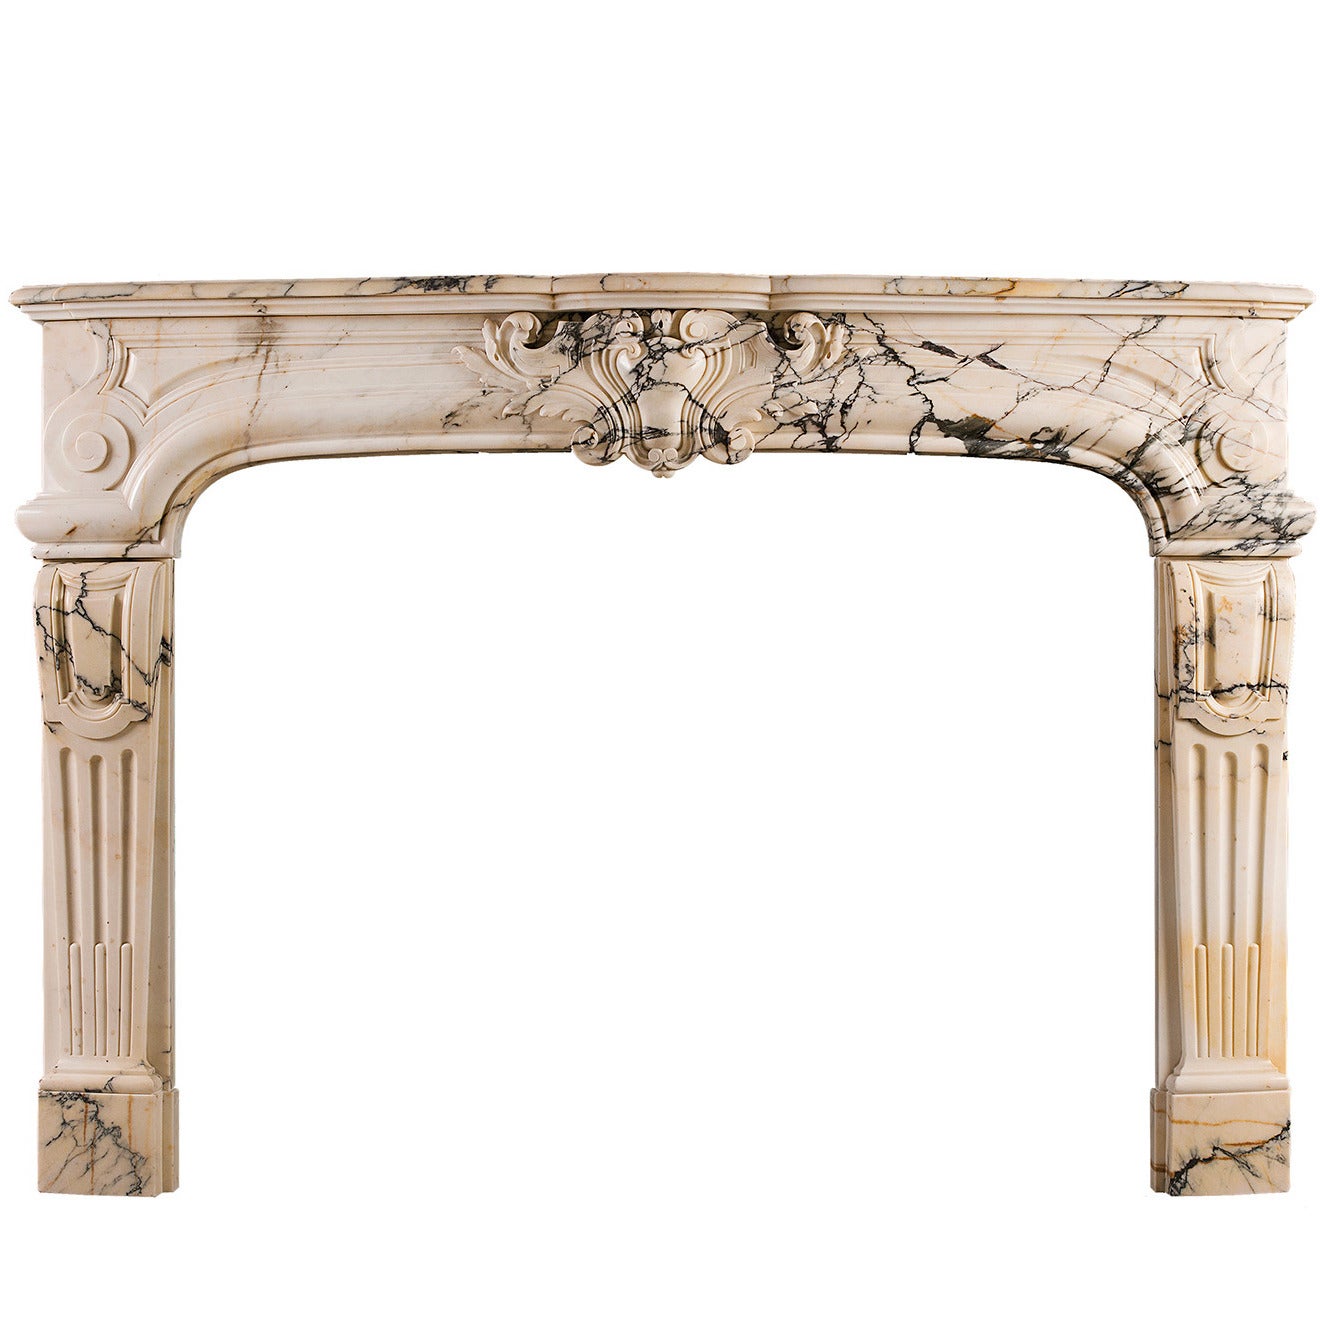 19th Century Louis XIV / Louis XV Style Antique Fireplace in Pavonazzo Marble